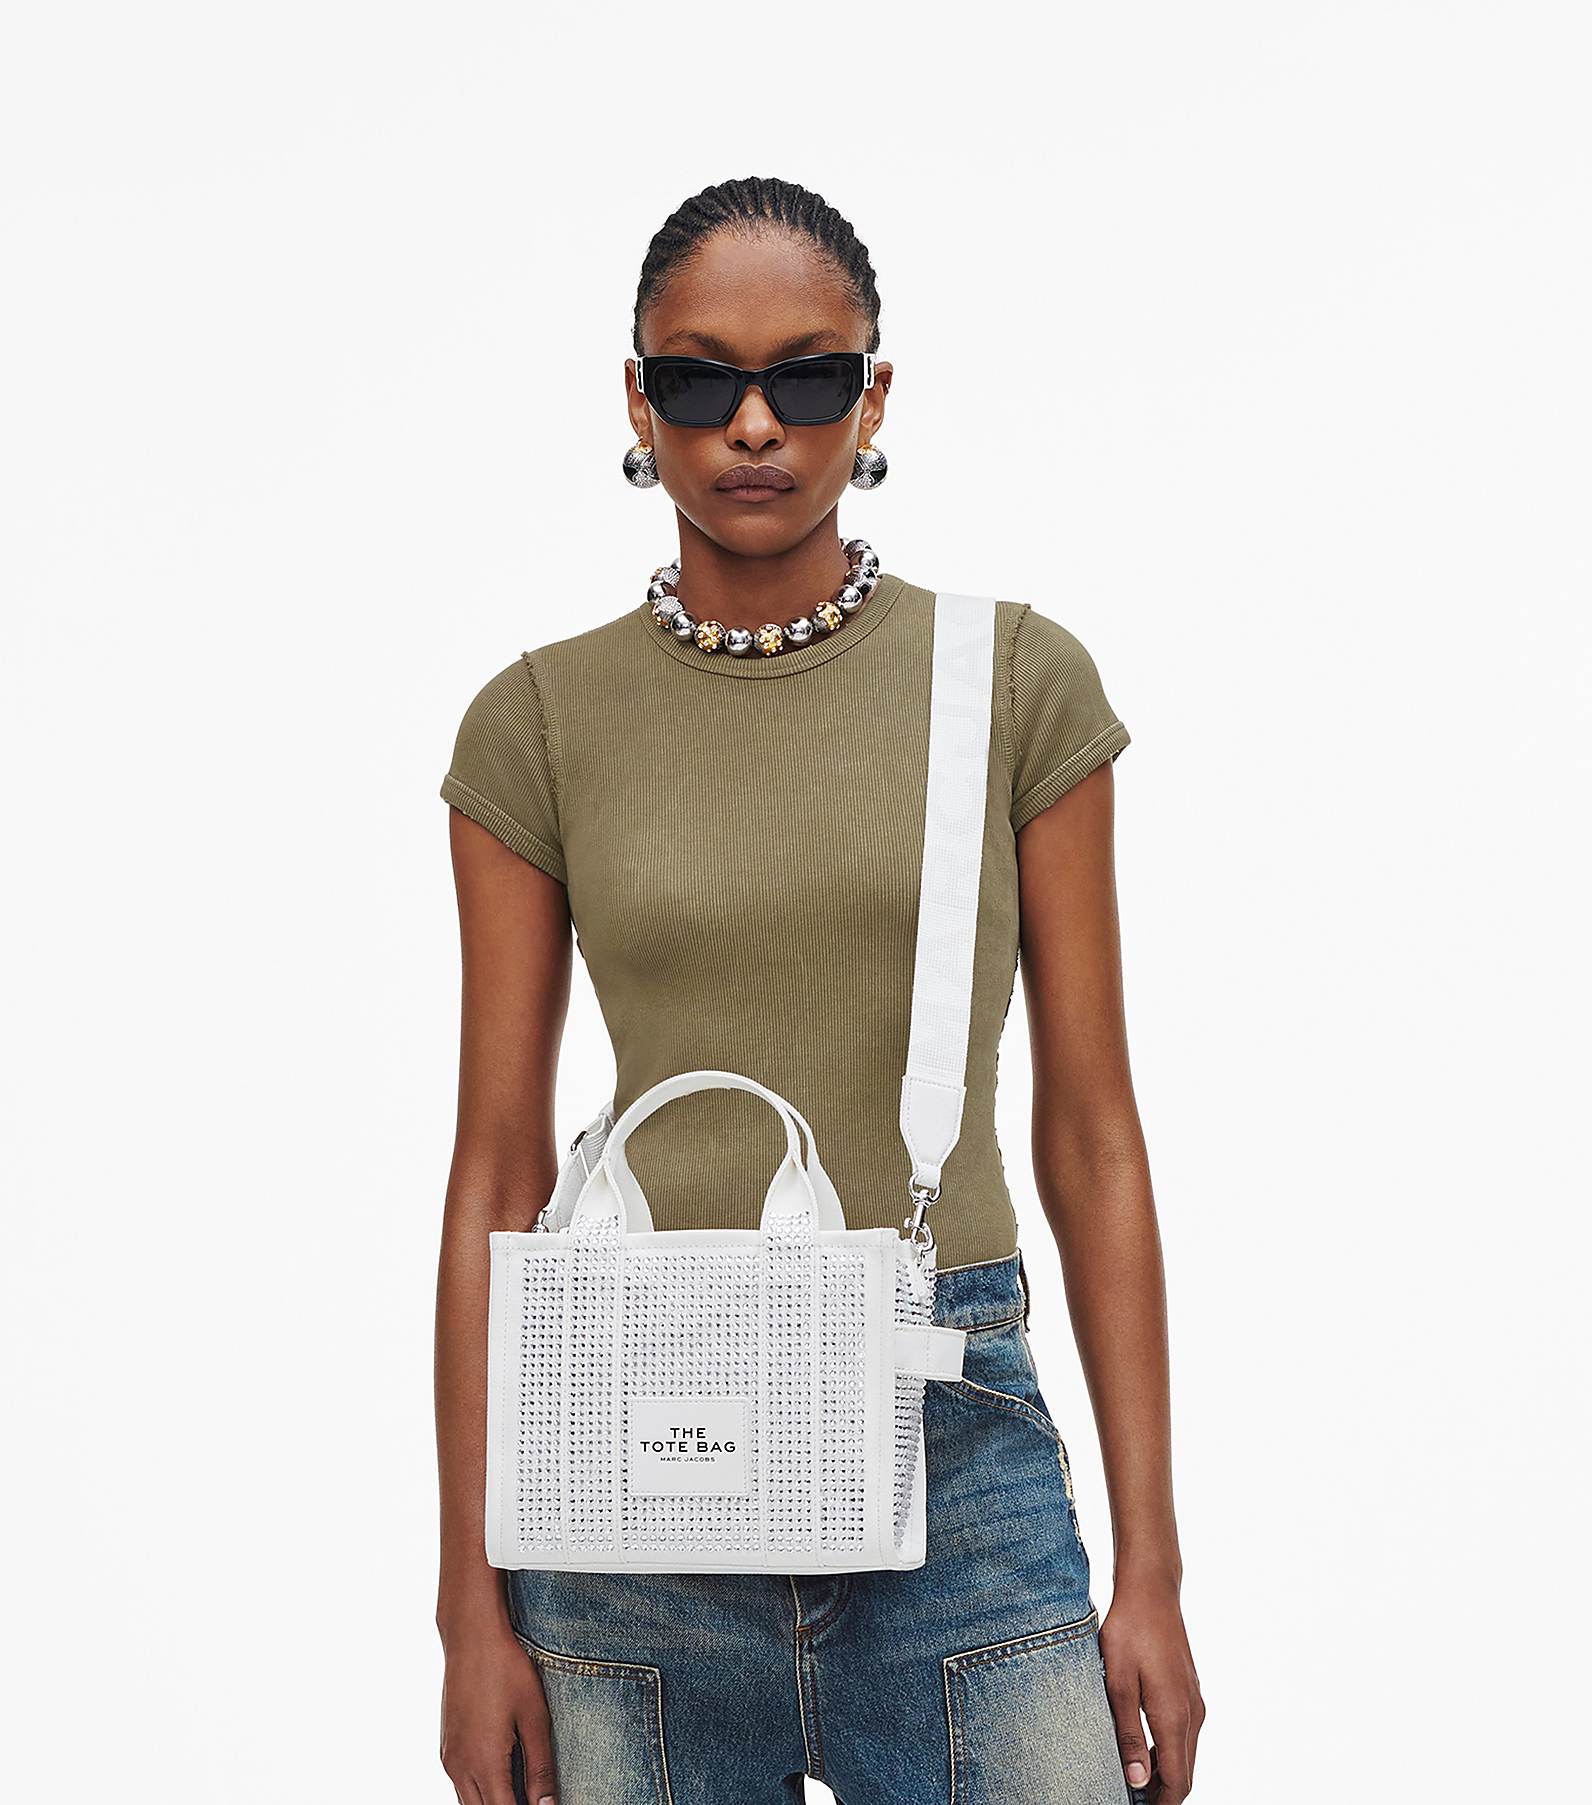 THE CRYSTAL CANVAS TOTE BAG SMALL